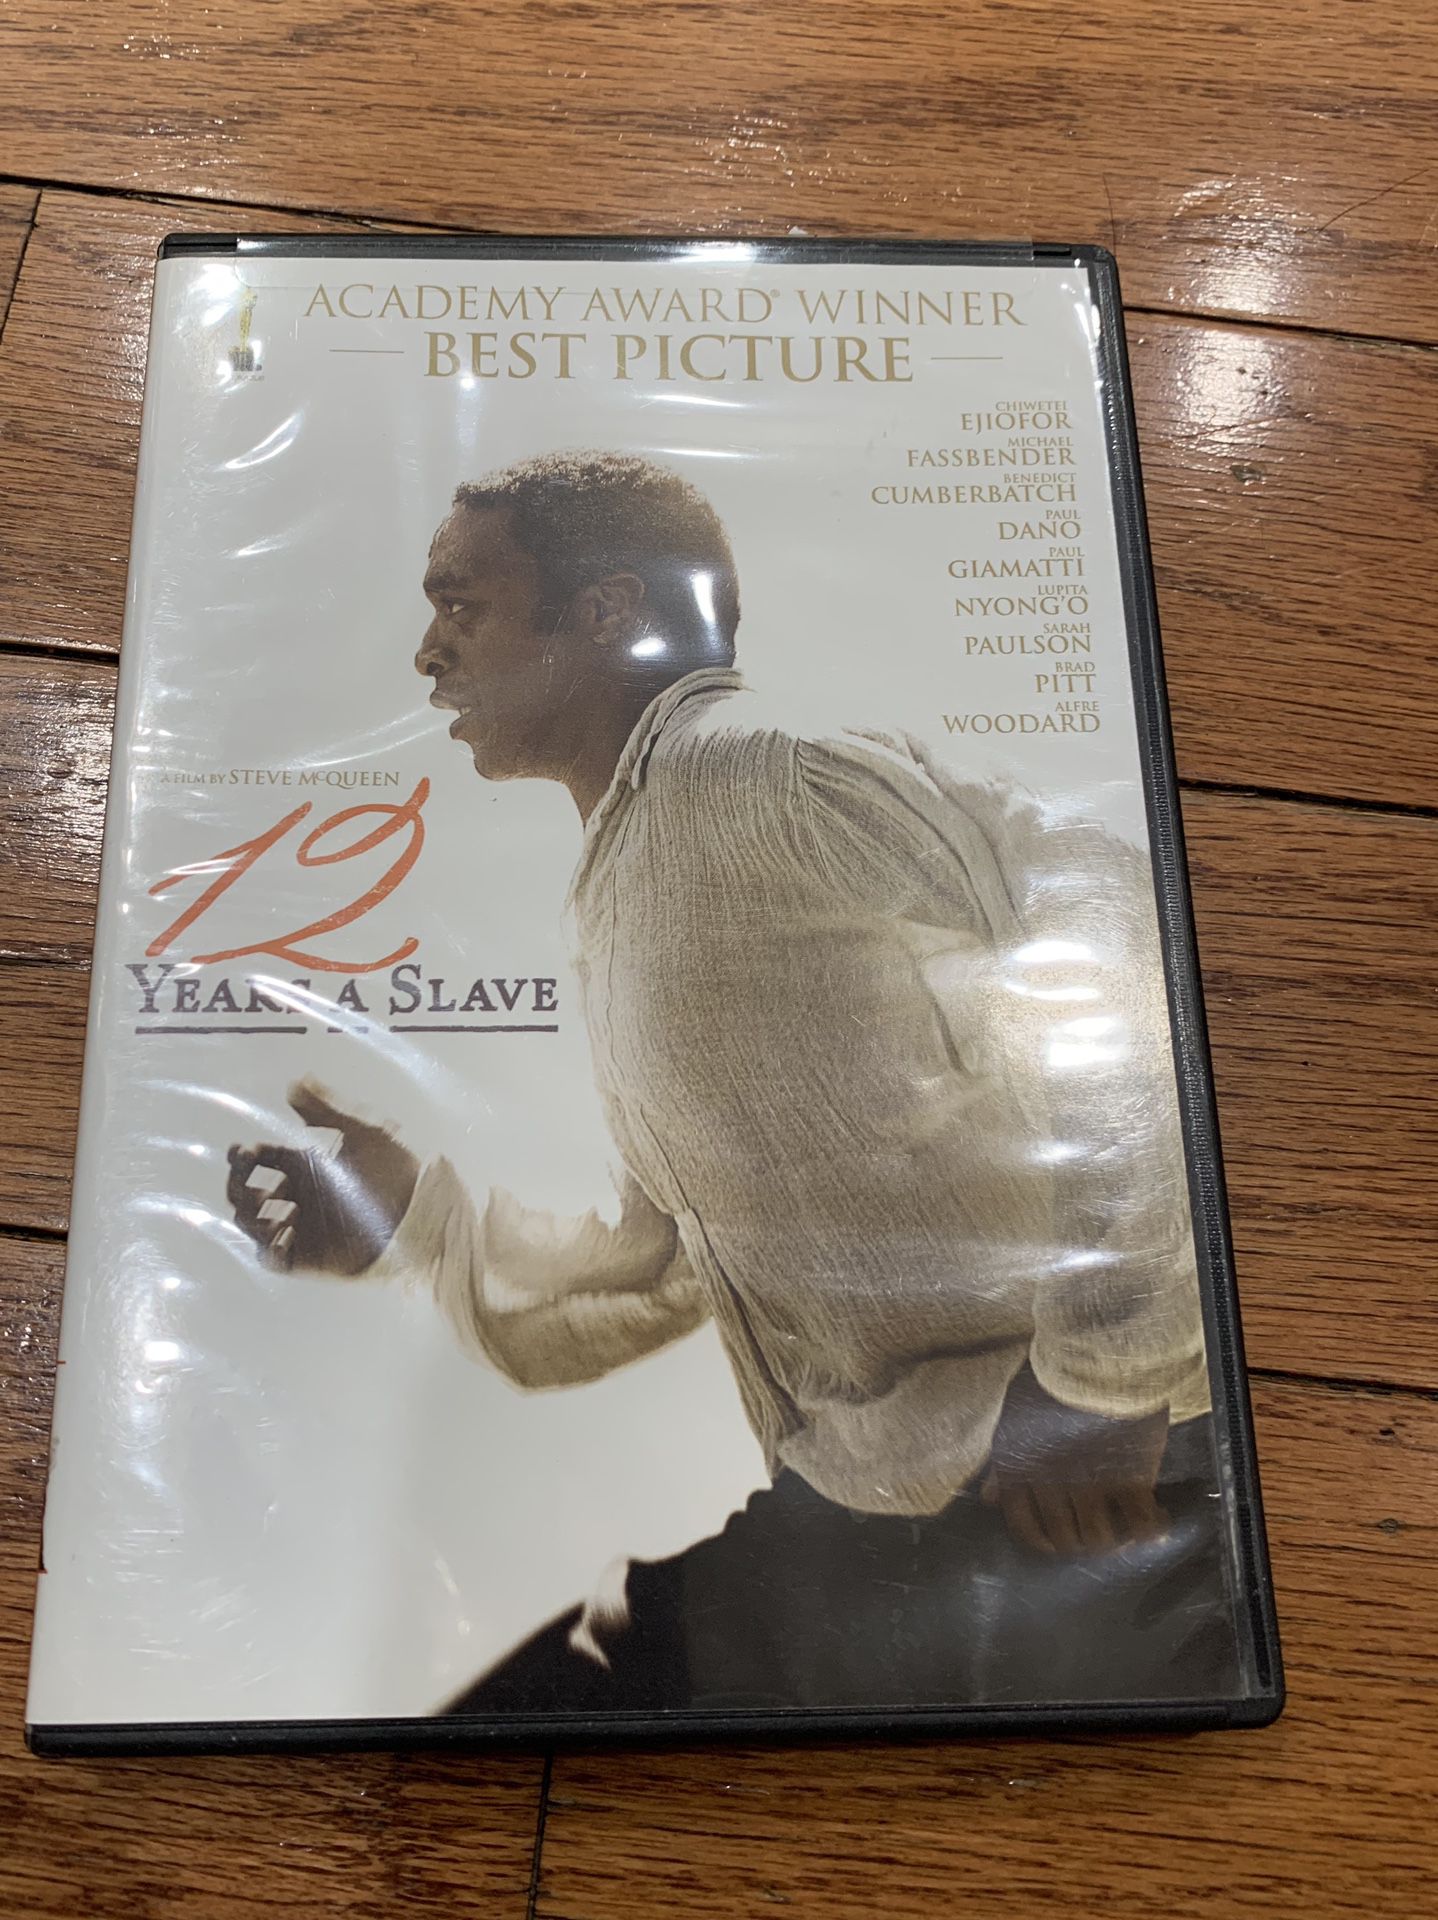 12 years a slave DVD new